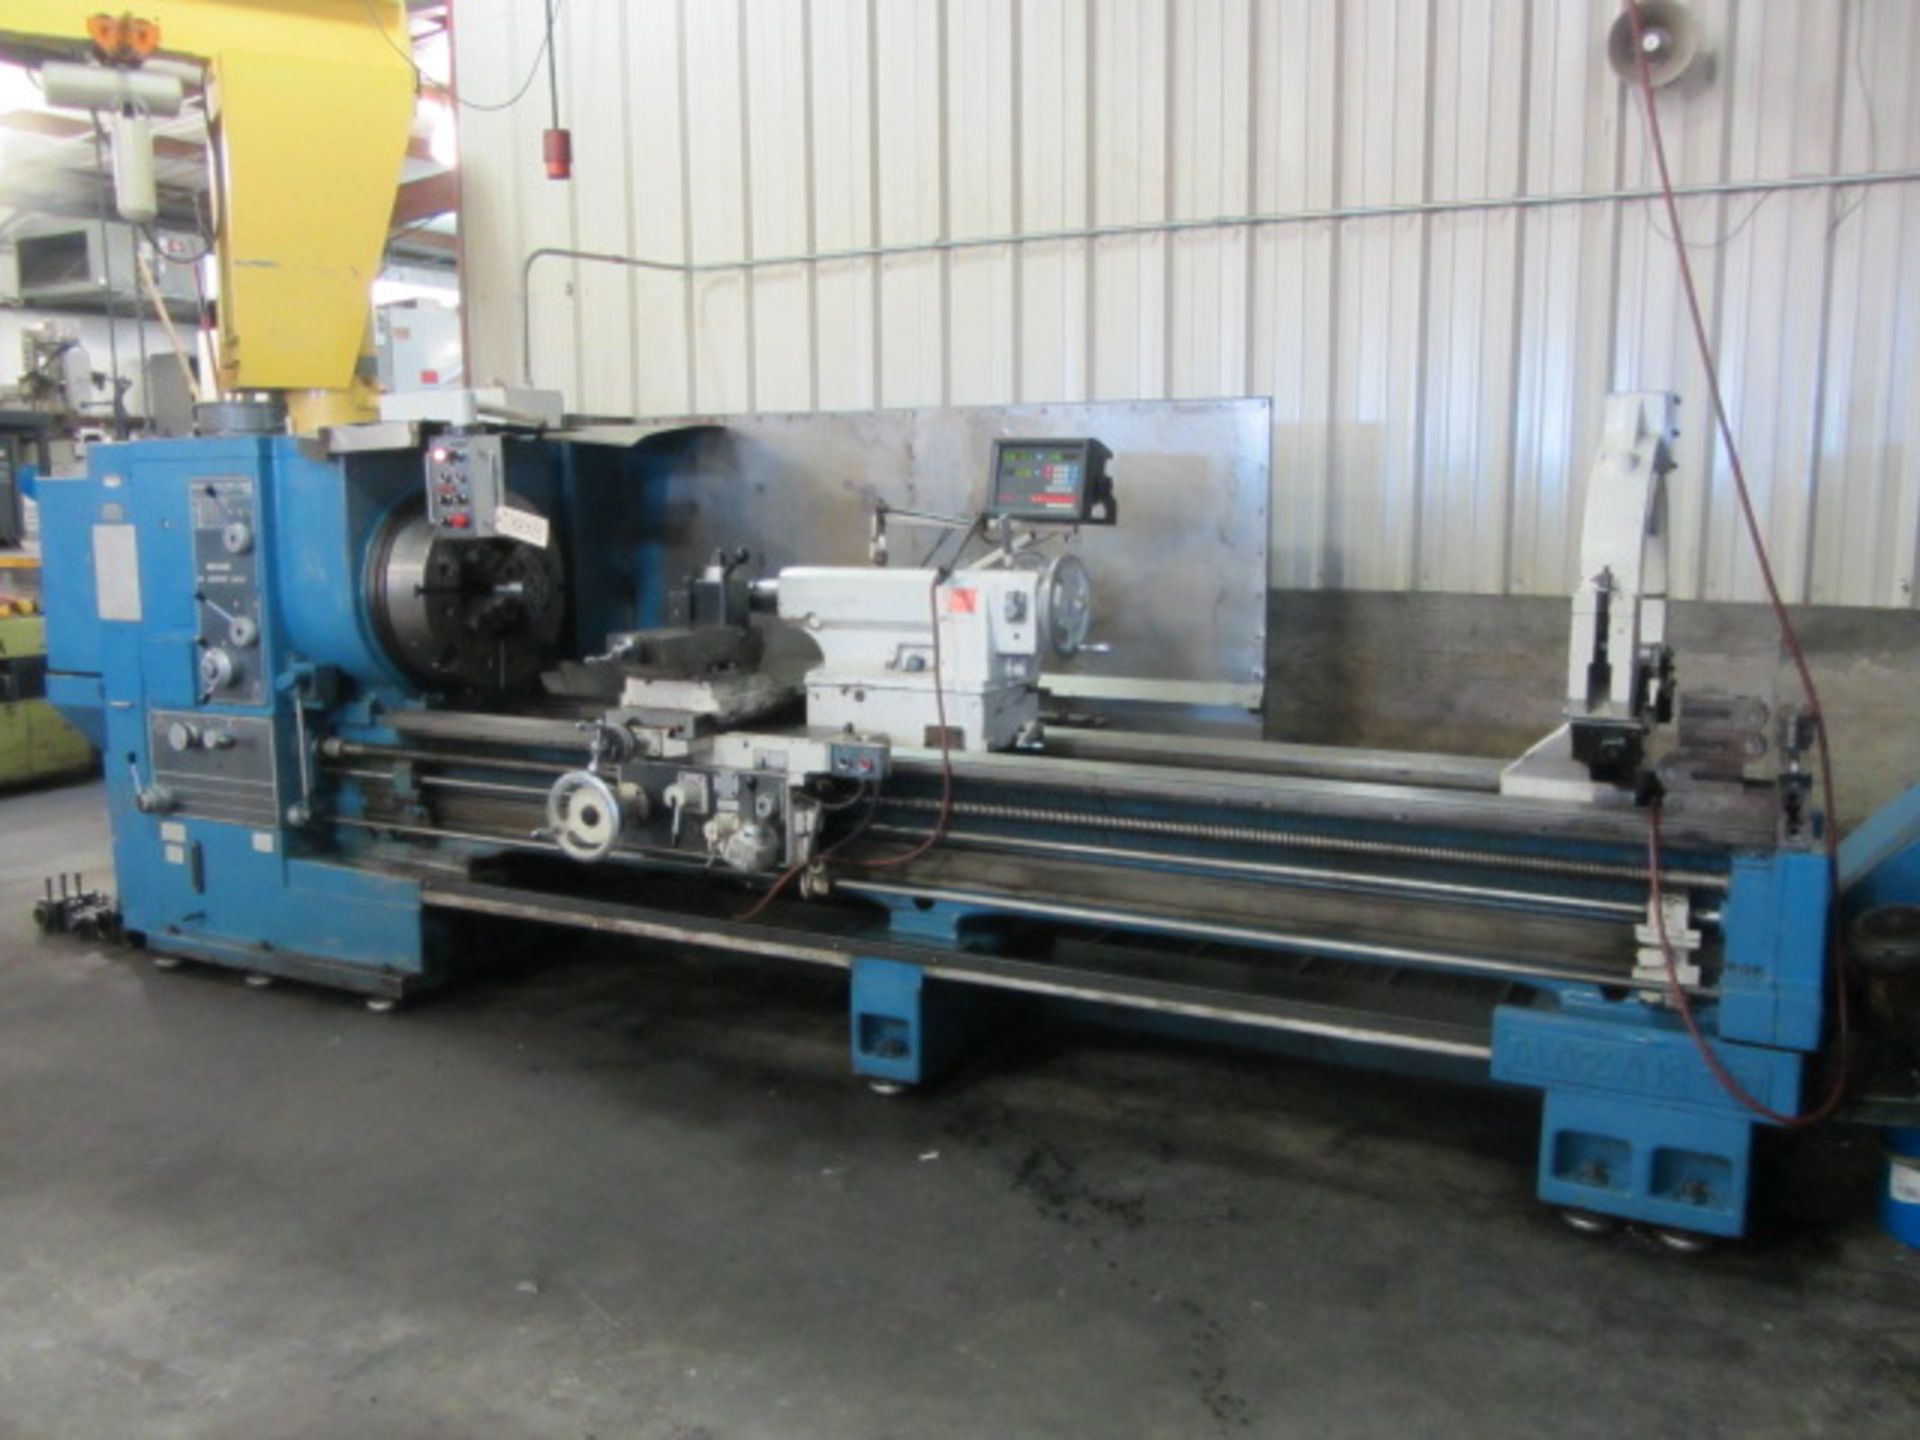 Mazak Heavy Duty Oil Country Engine Lathe with Dual 24'' 4-Jaw Chucks, 34'' Swing Over Bed x 100'' - Image 7 of 7